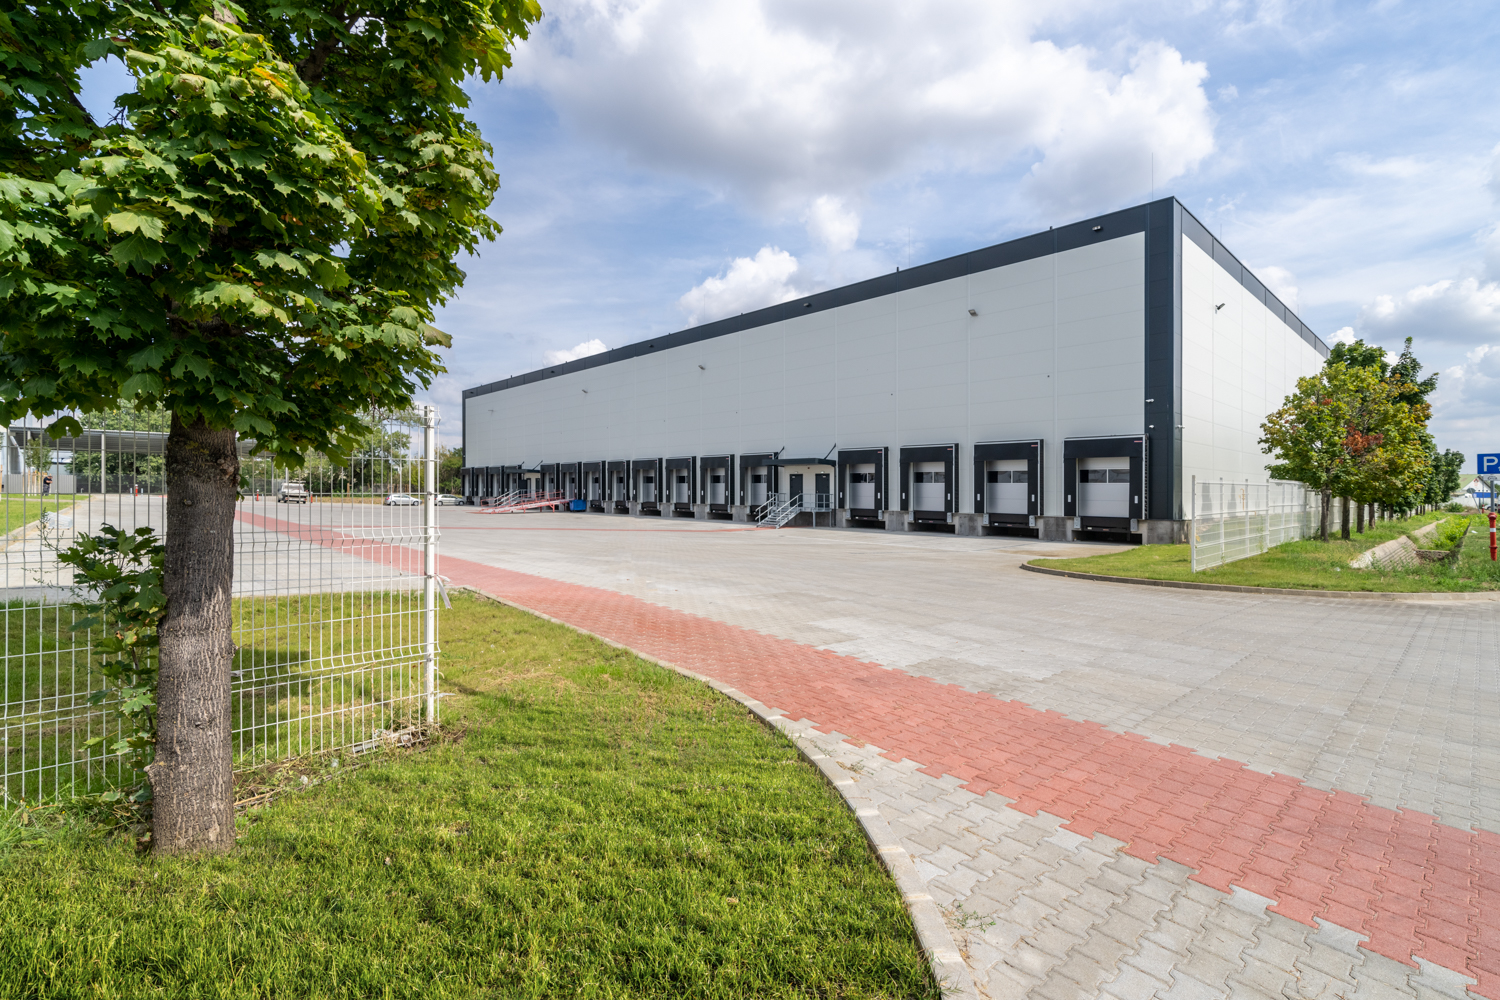 WING has completed its latest industrial property development project, Hall ‘I’ at Airport City Business Park